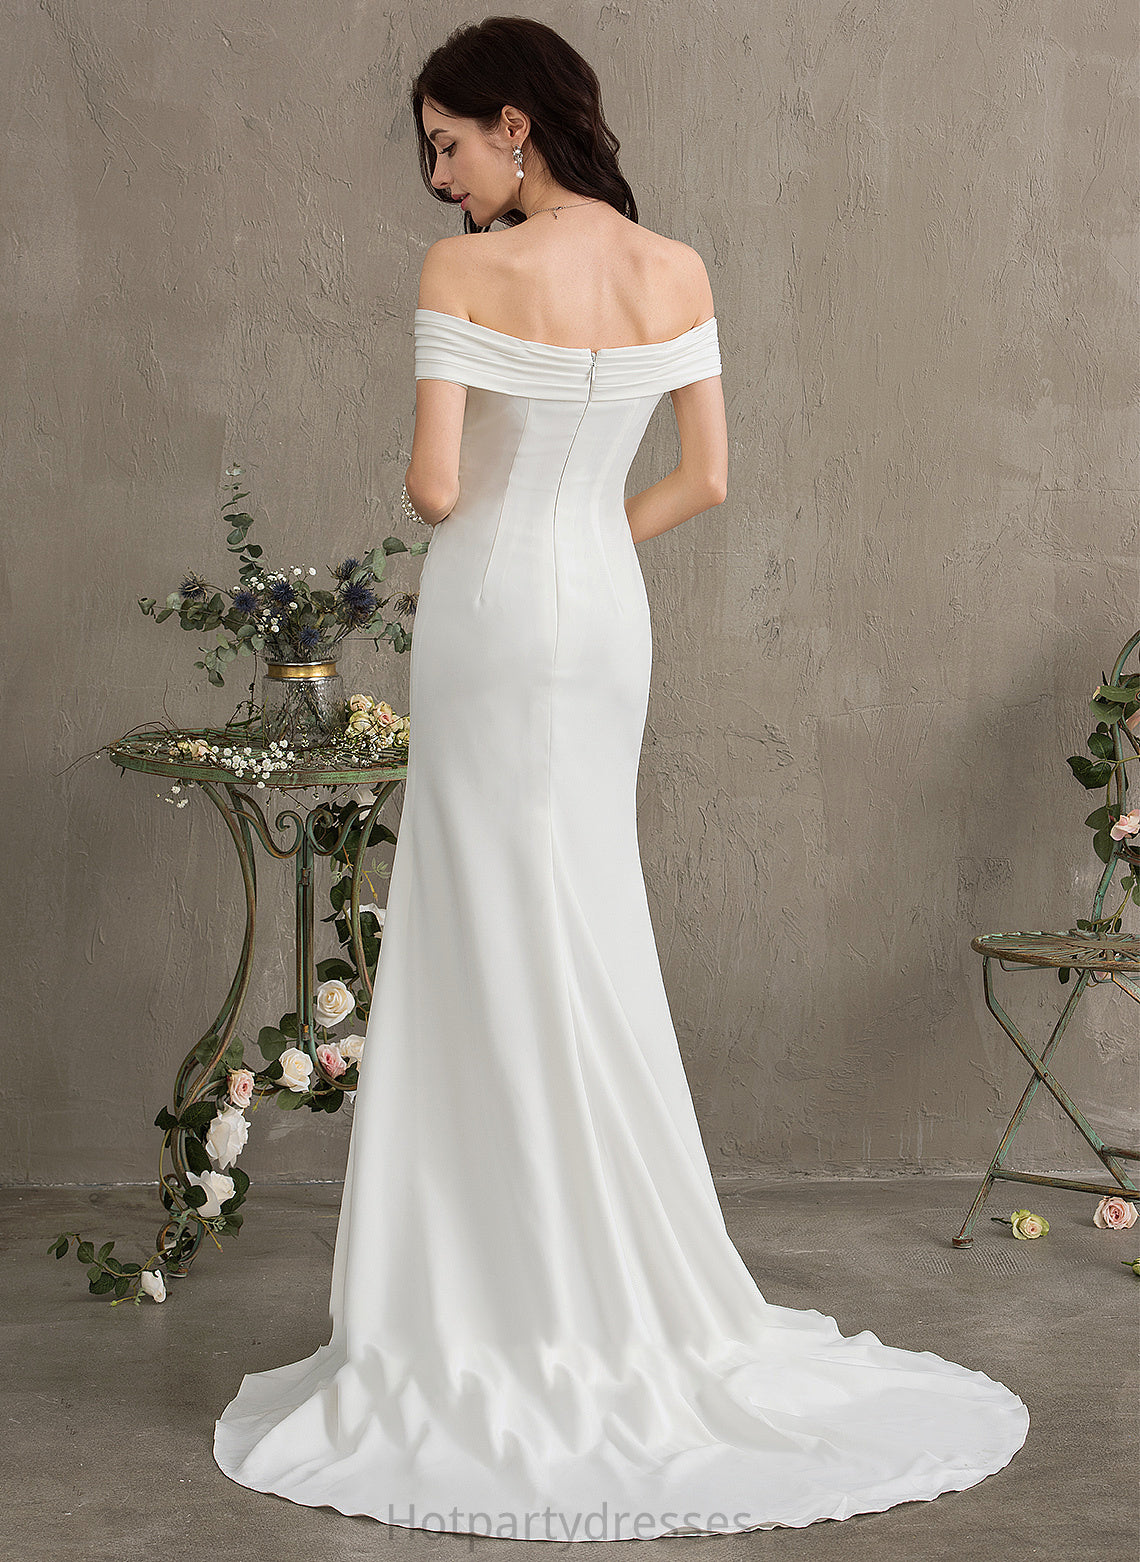 Sheath/Column Off-the-Shoulder Train Wedding Ruffle Front Split Stretch Holly Crepe Dress Wedding Dresses Sweep With